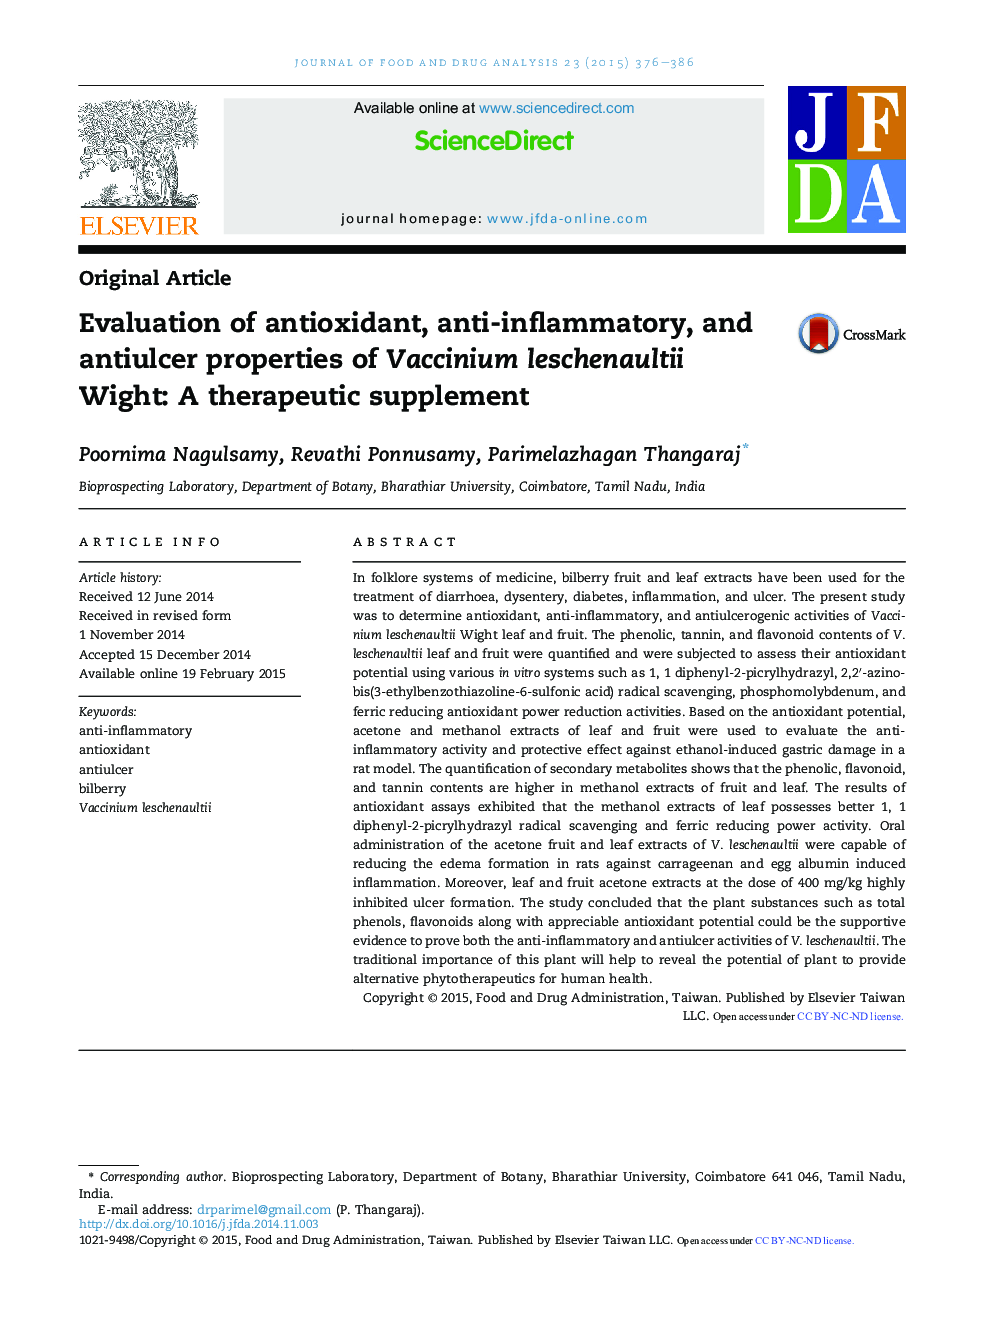 Evaluation of antioxidant, anti-inflammatory, and antiulcer properties of Vaccinium leschenaultii Wight: A therapeutic supplement